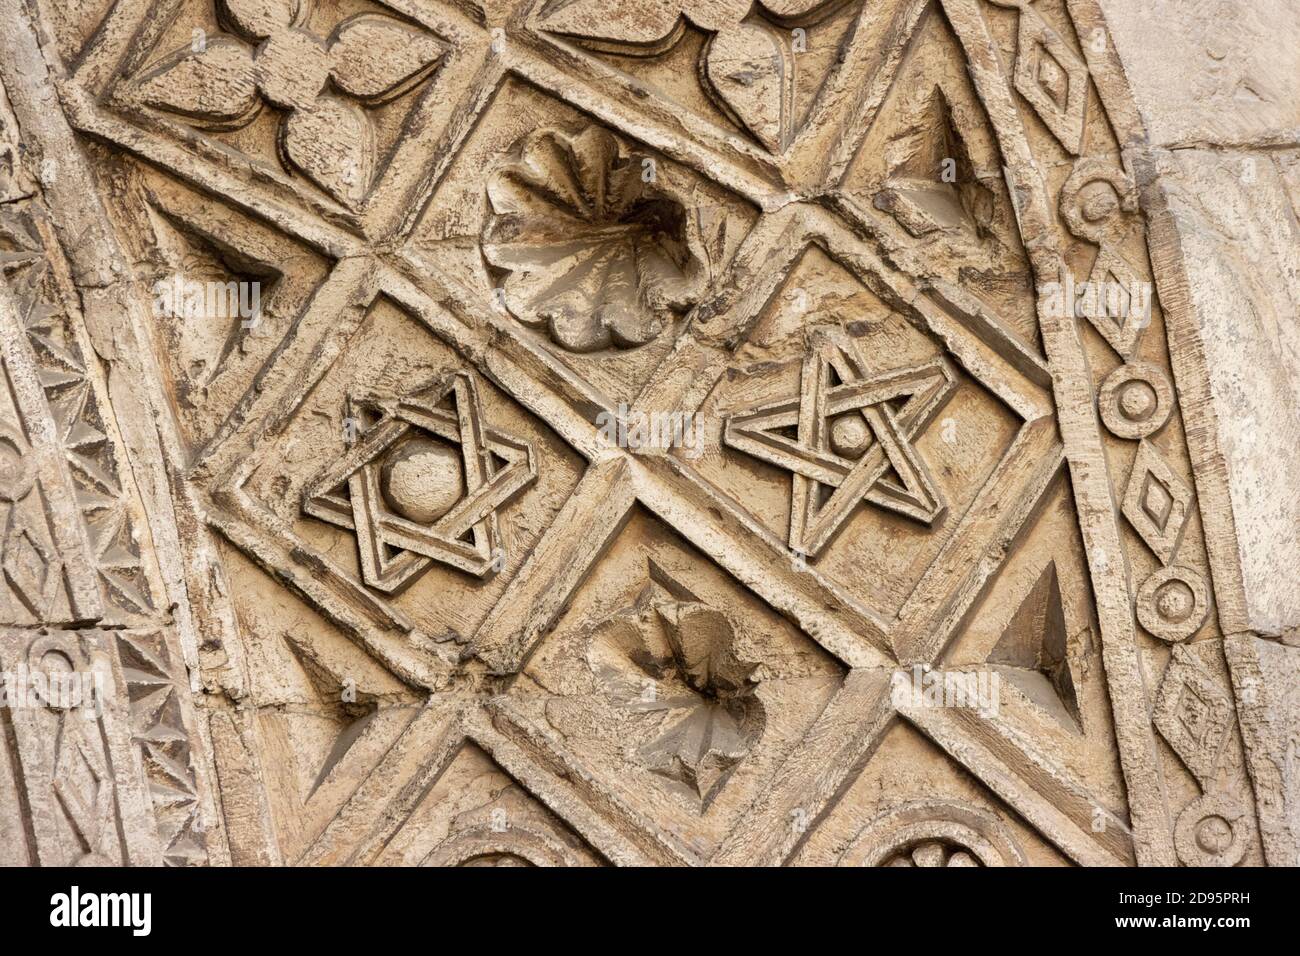 detail of carving on arch above entrance, Bab al-Futuh, Cairo, Egypt Stock Photo